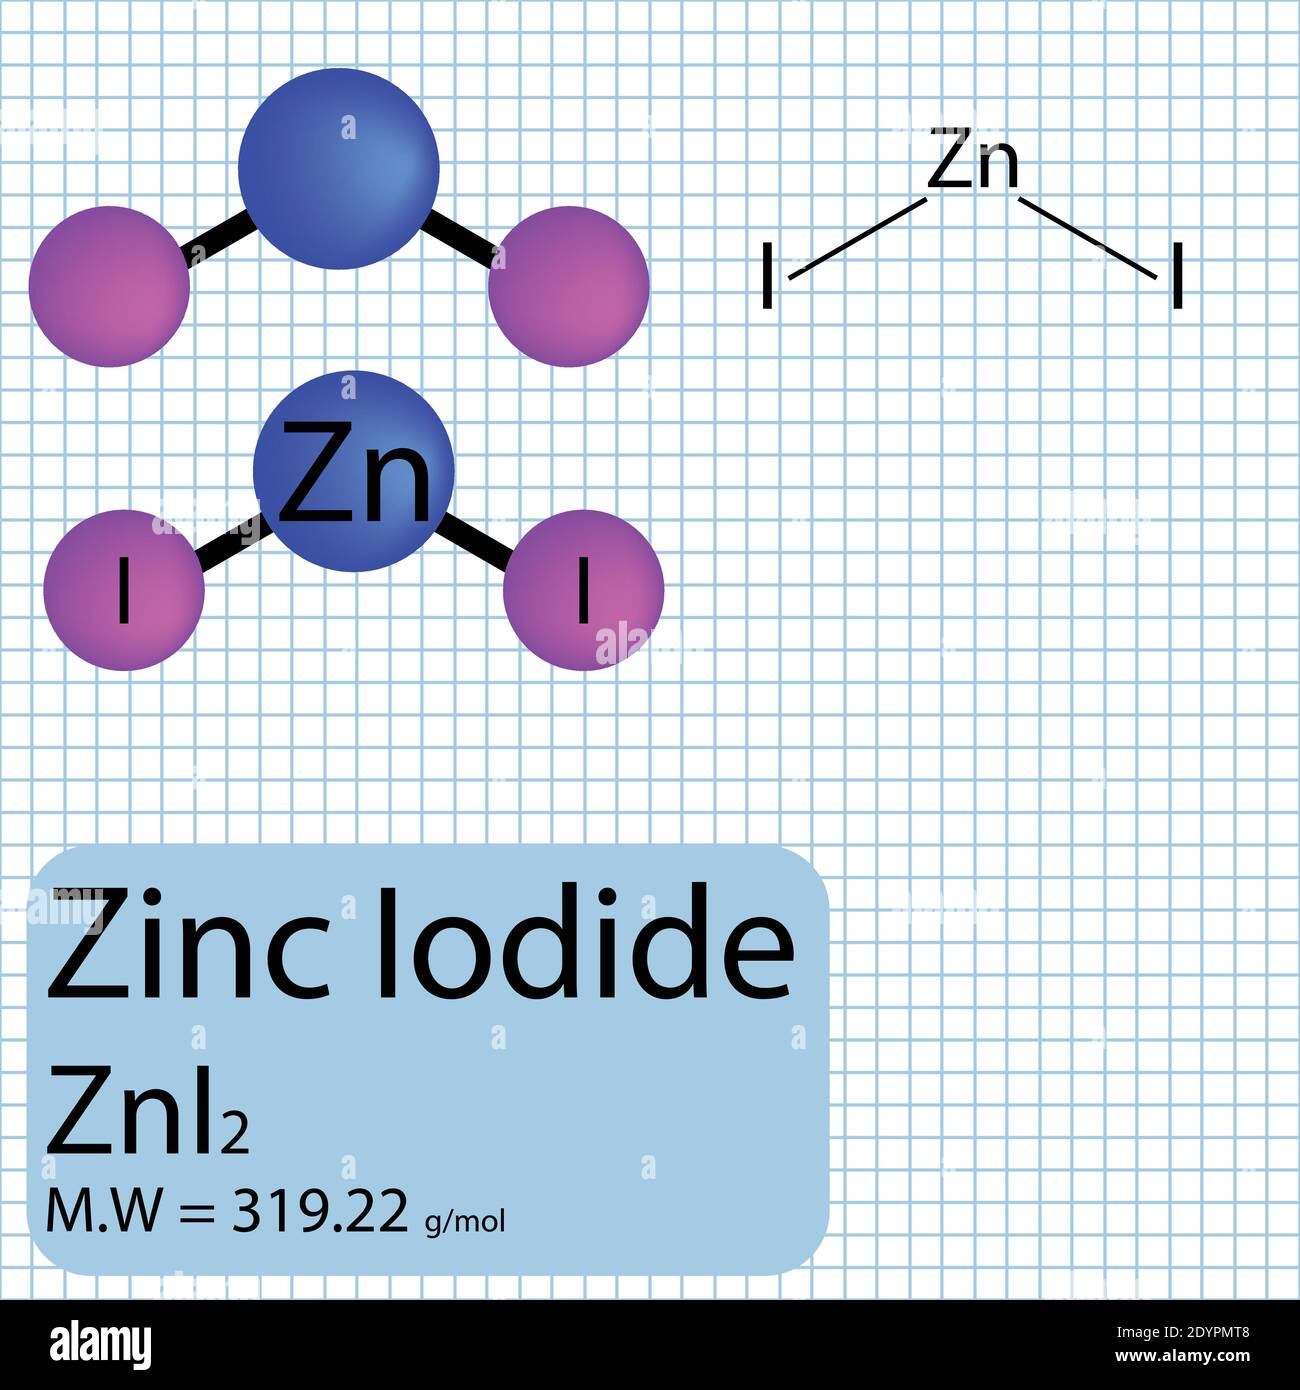 Zinc Iodide molecule ball and stick model with chemical structure on school paper background. Inorganic ZnI2 compound with molecular weight. Stock Vector